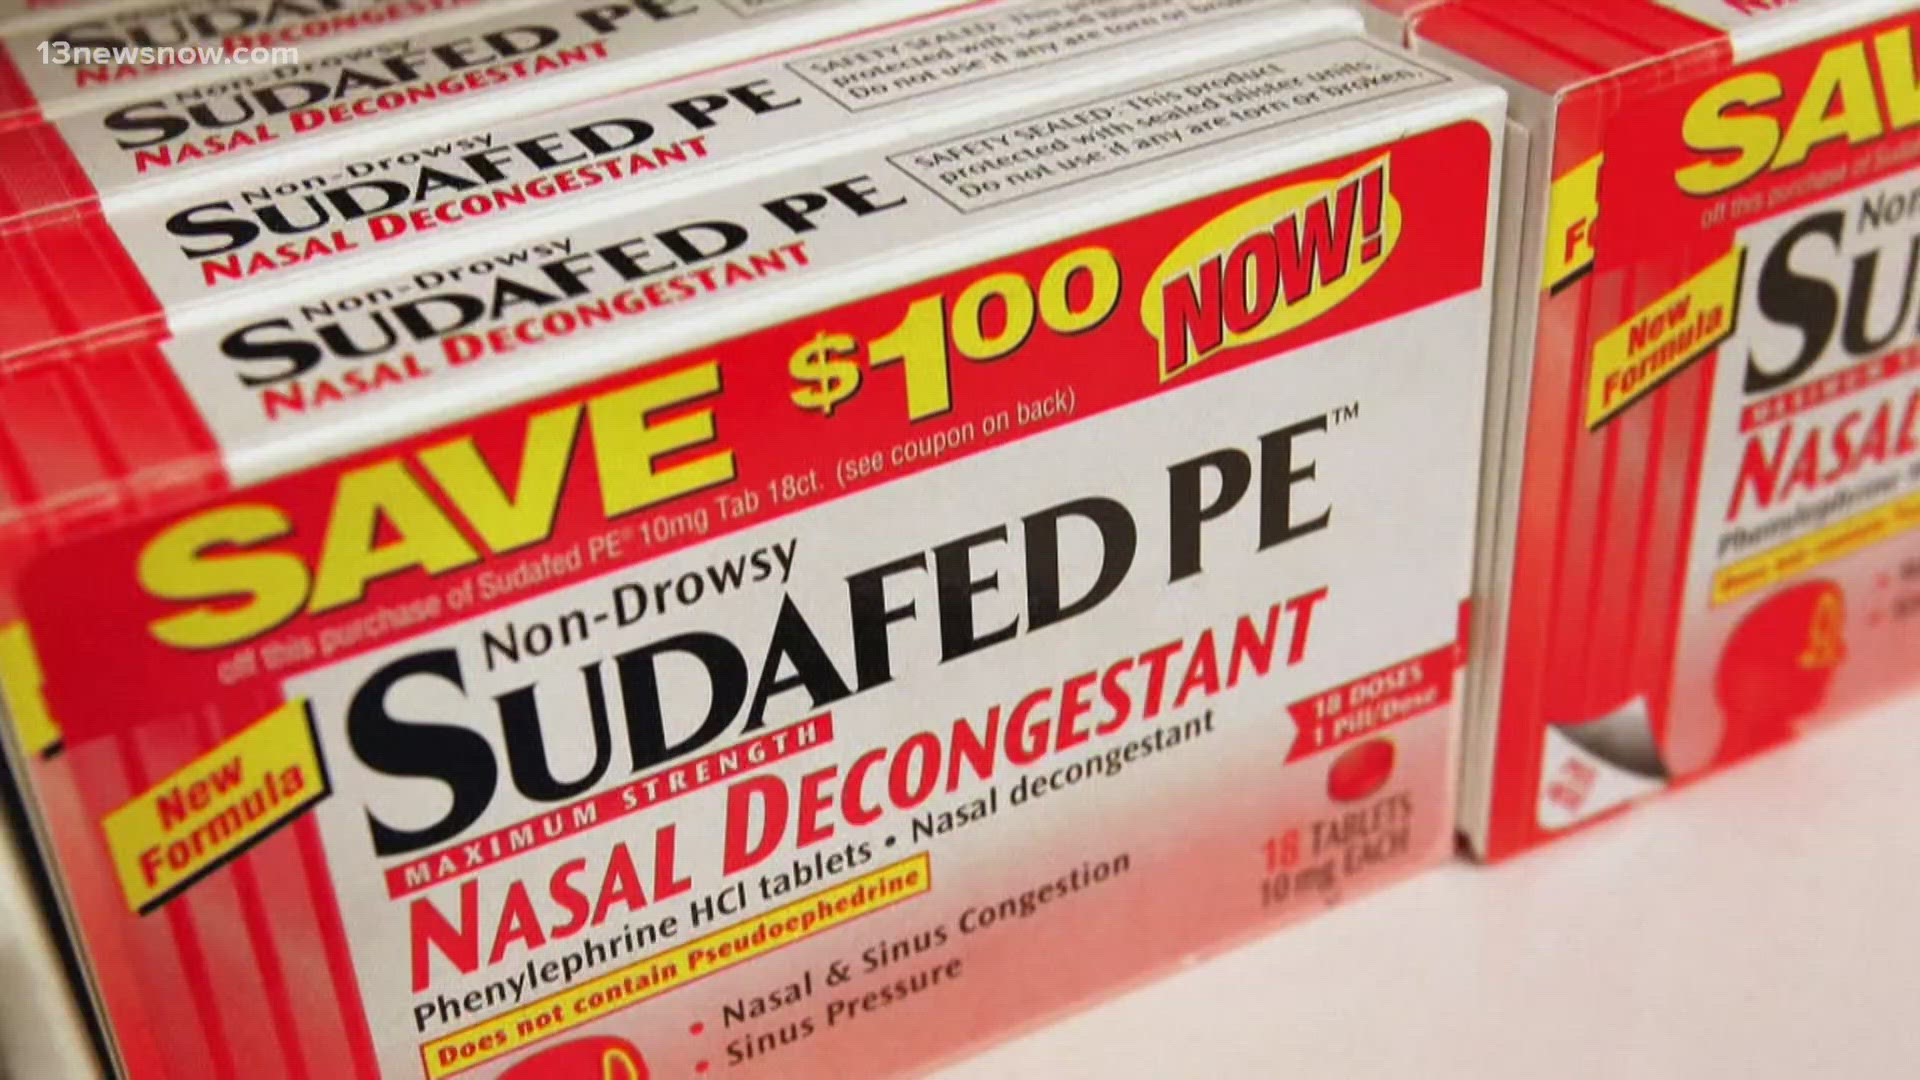 As we head into the cold-and-flu season, the FDA says some forms of the most popular nasal decongestants don't actually work.